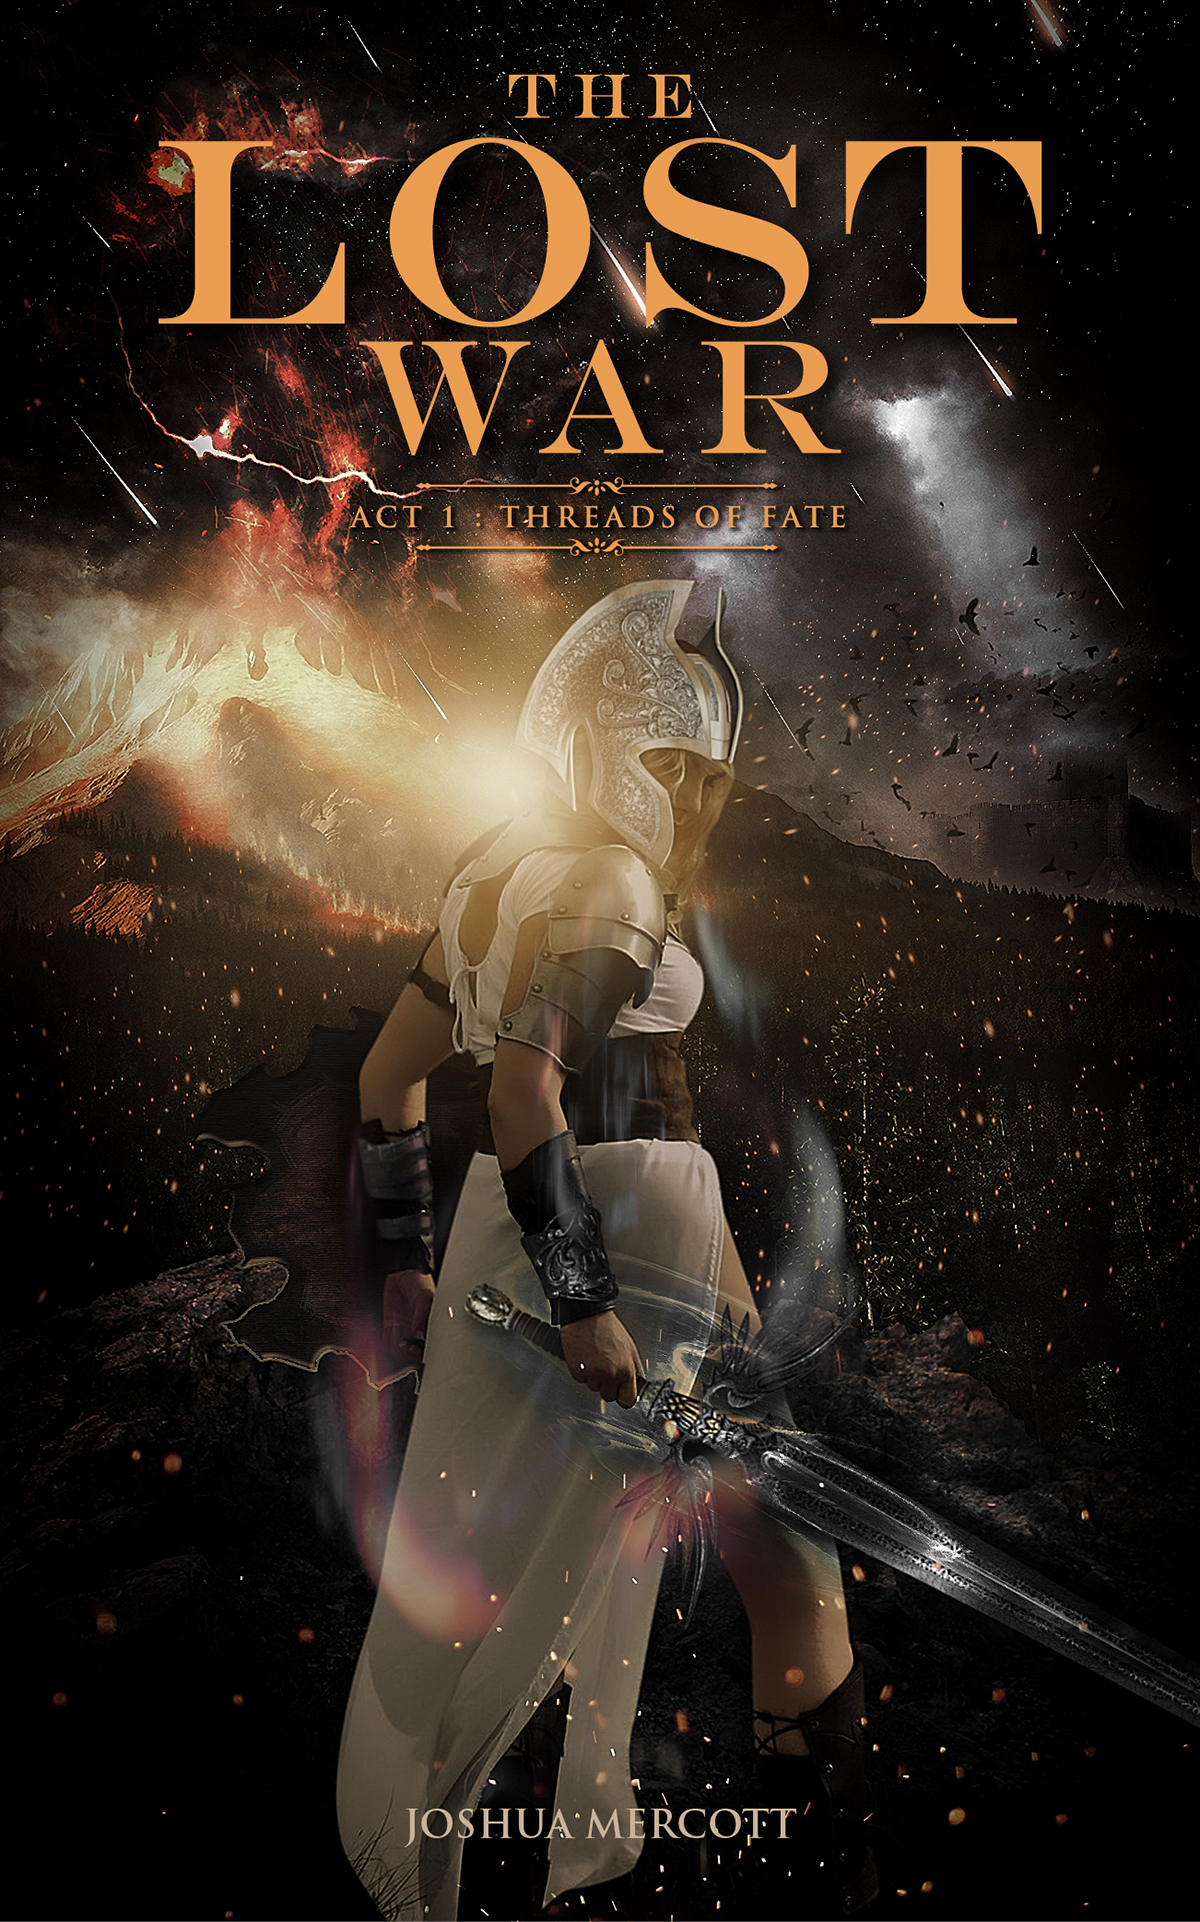 book act Joshua mercott thread Threads of fate War lost the epic anto verbulance cover design